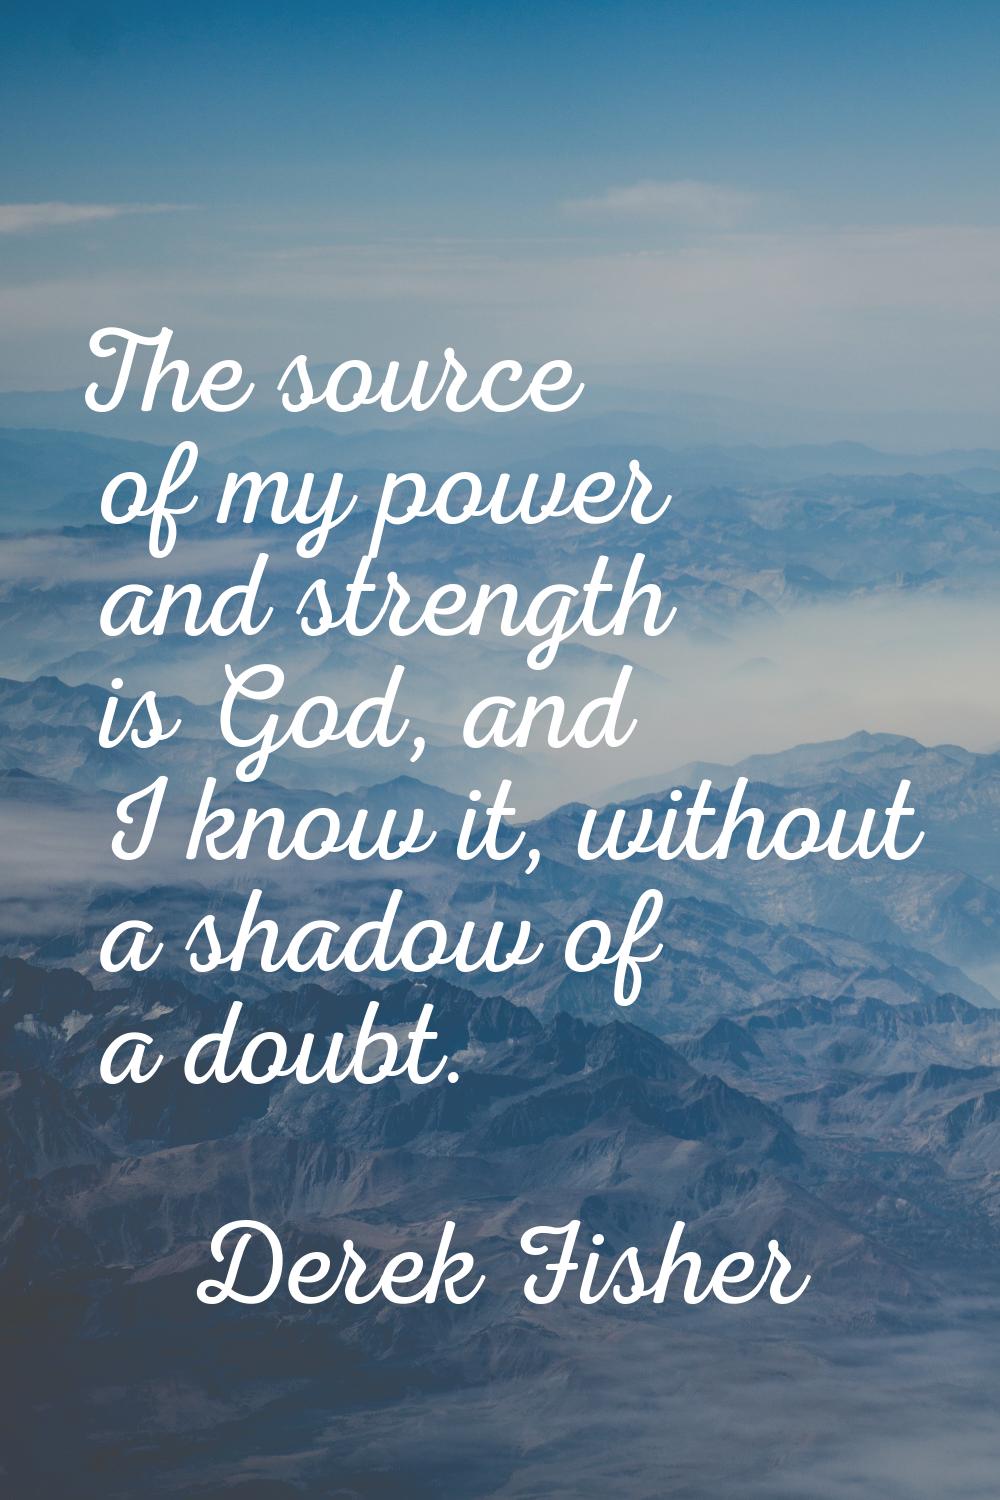 The source of my power and strength is God, and I know it, without a shadow of a doubt.